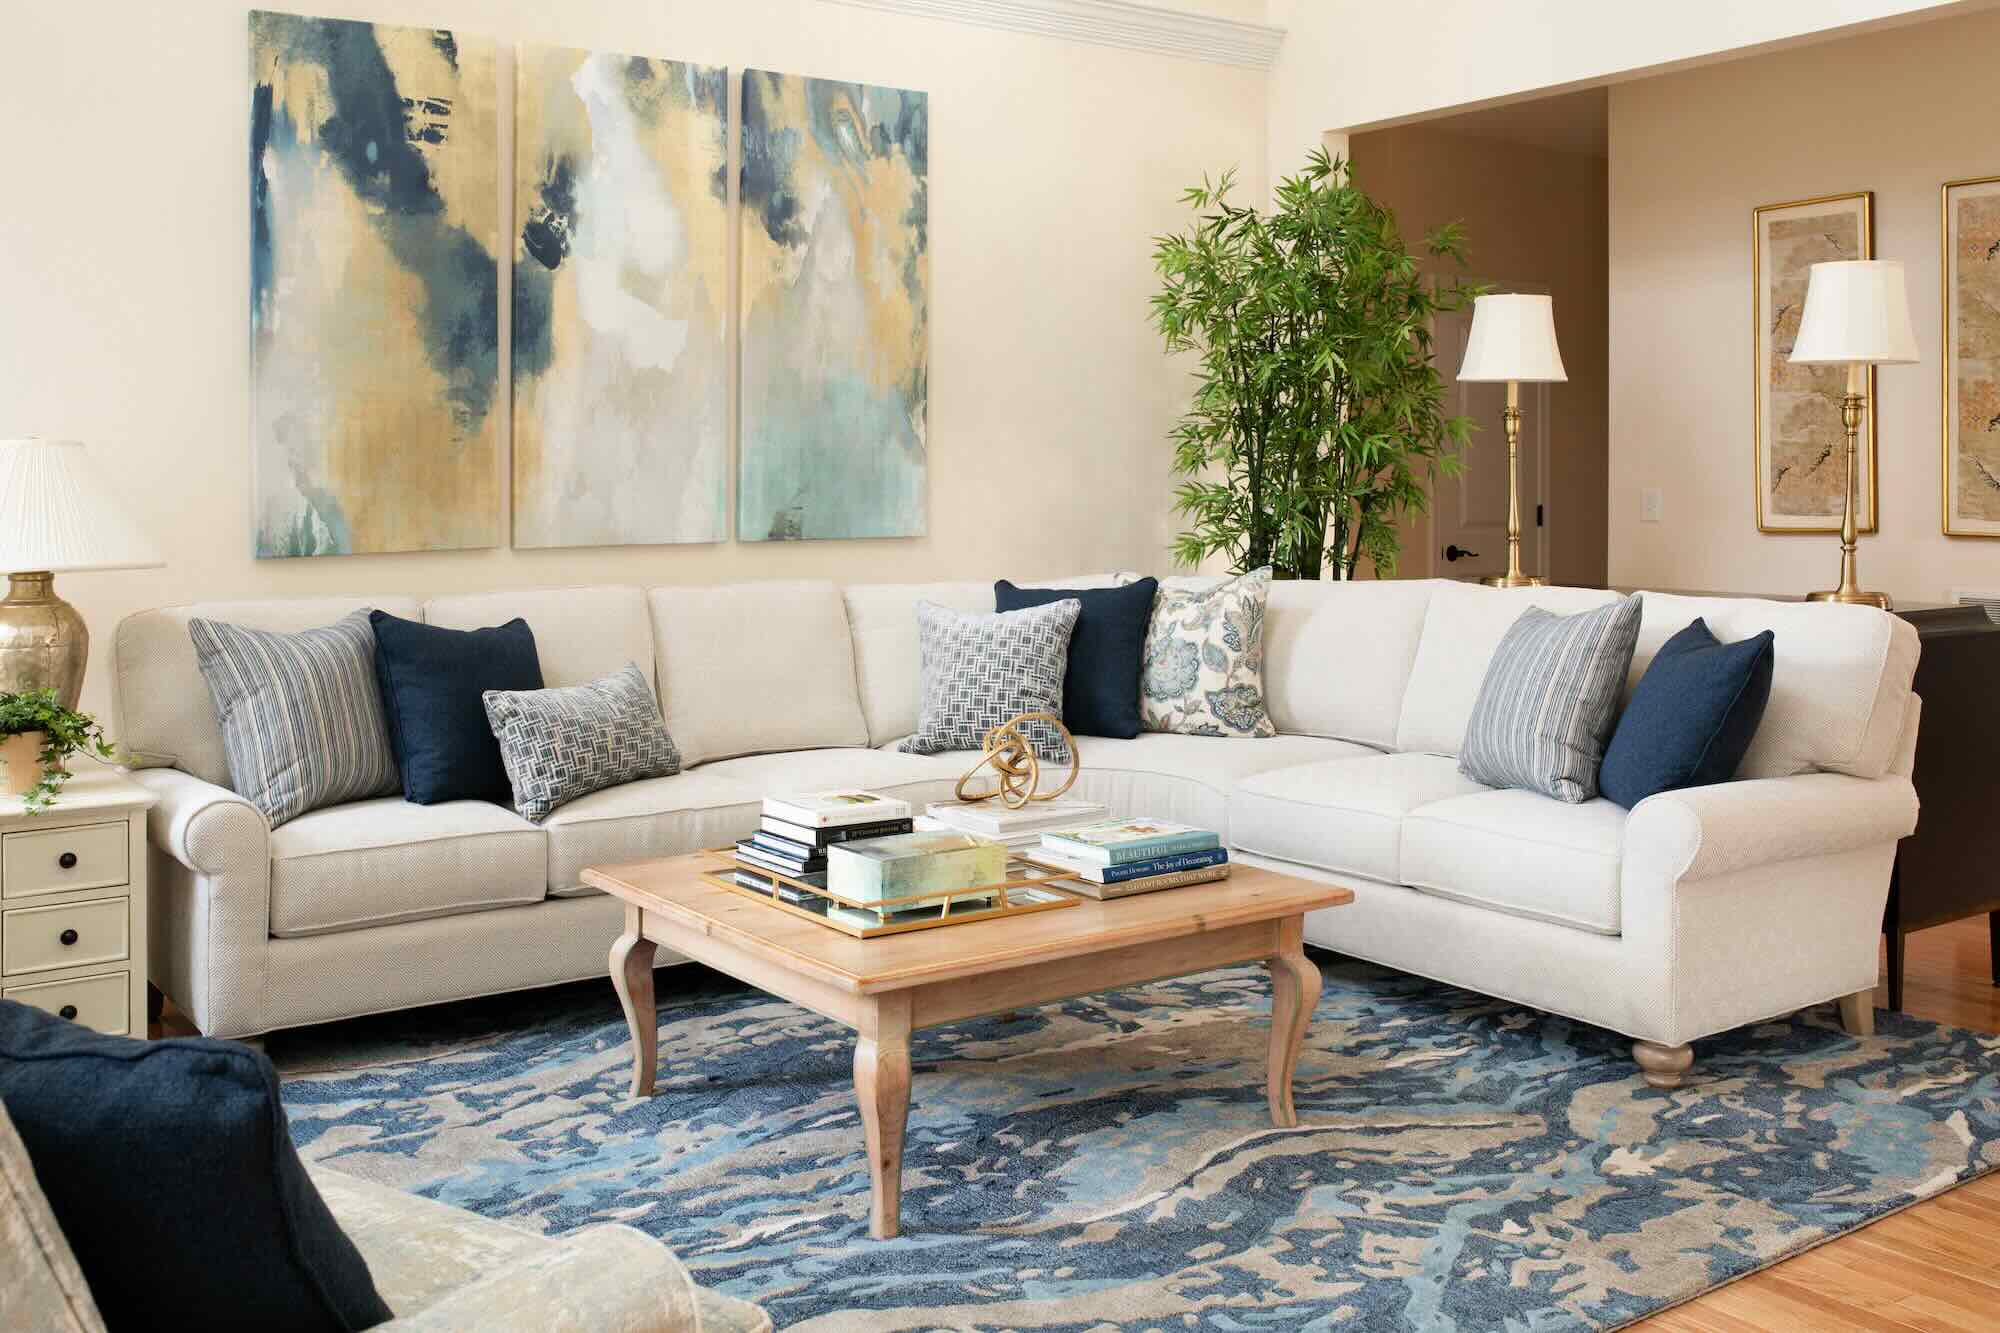 How To Arrange Pillows On A Sectional Sofa